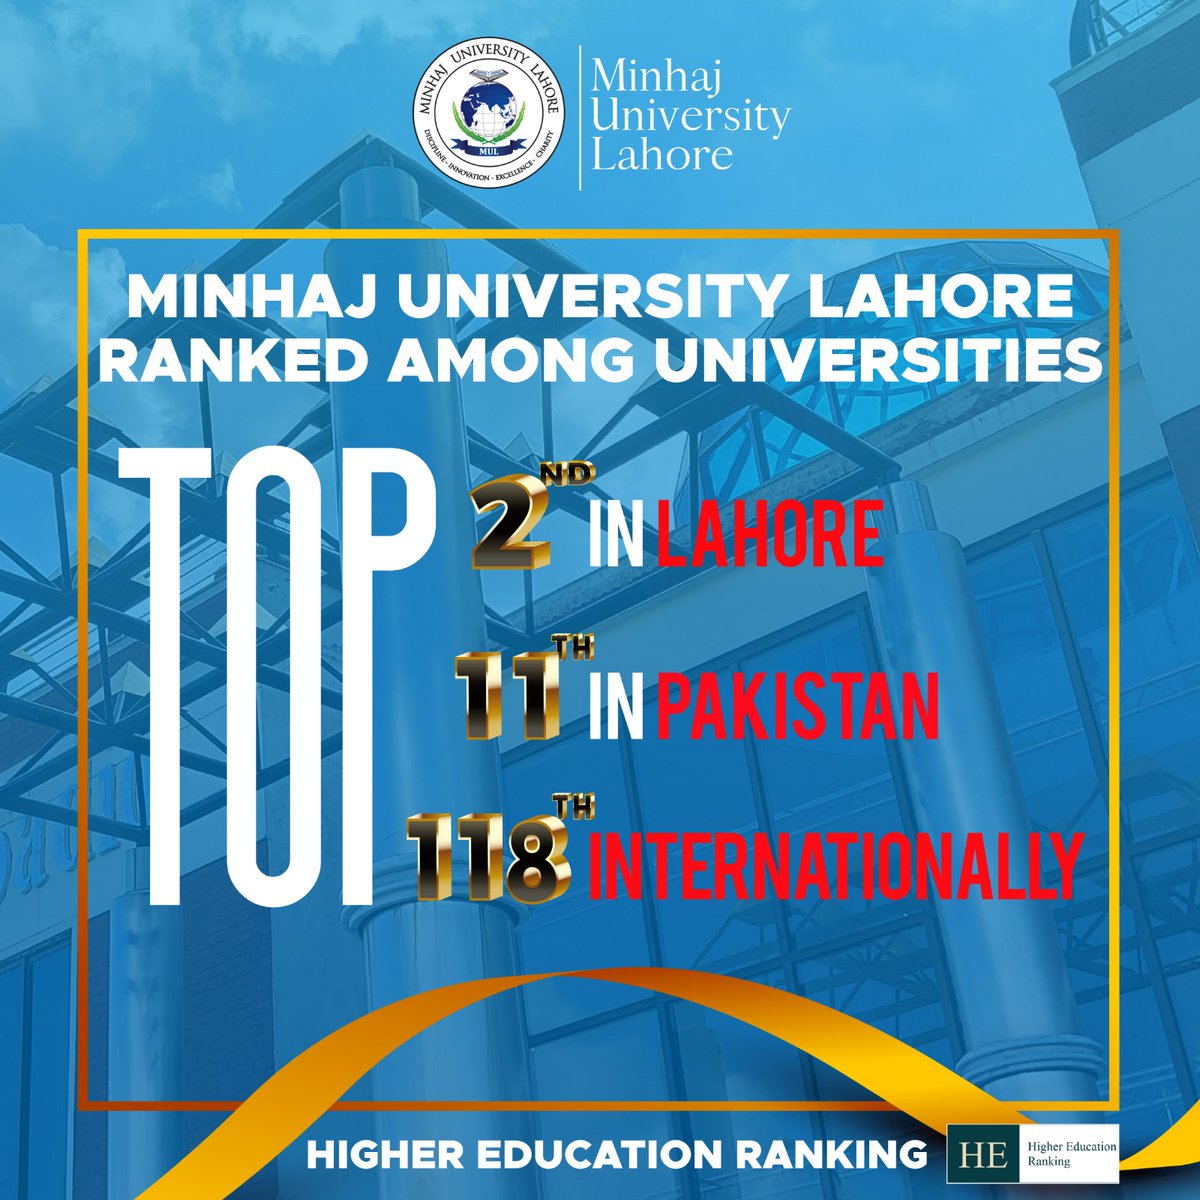 Minhaj University Lahore excels in the 2024 HE Rankings: 118th globally, 11th in Pakistan, and 2nd in Lahore. Demonstrating academic prowess and local prominence. ranking.heranking.com/2024/mul.edu.pk #MUL #EducationRankings